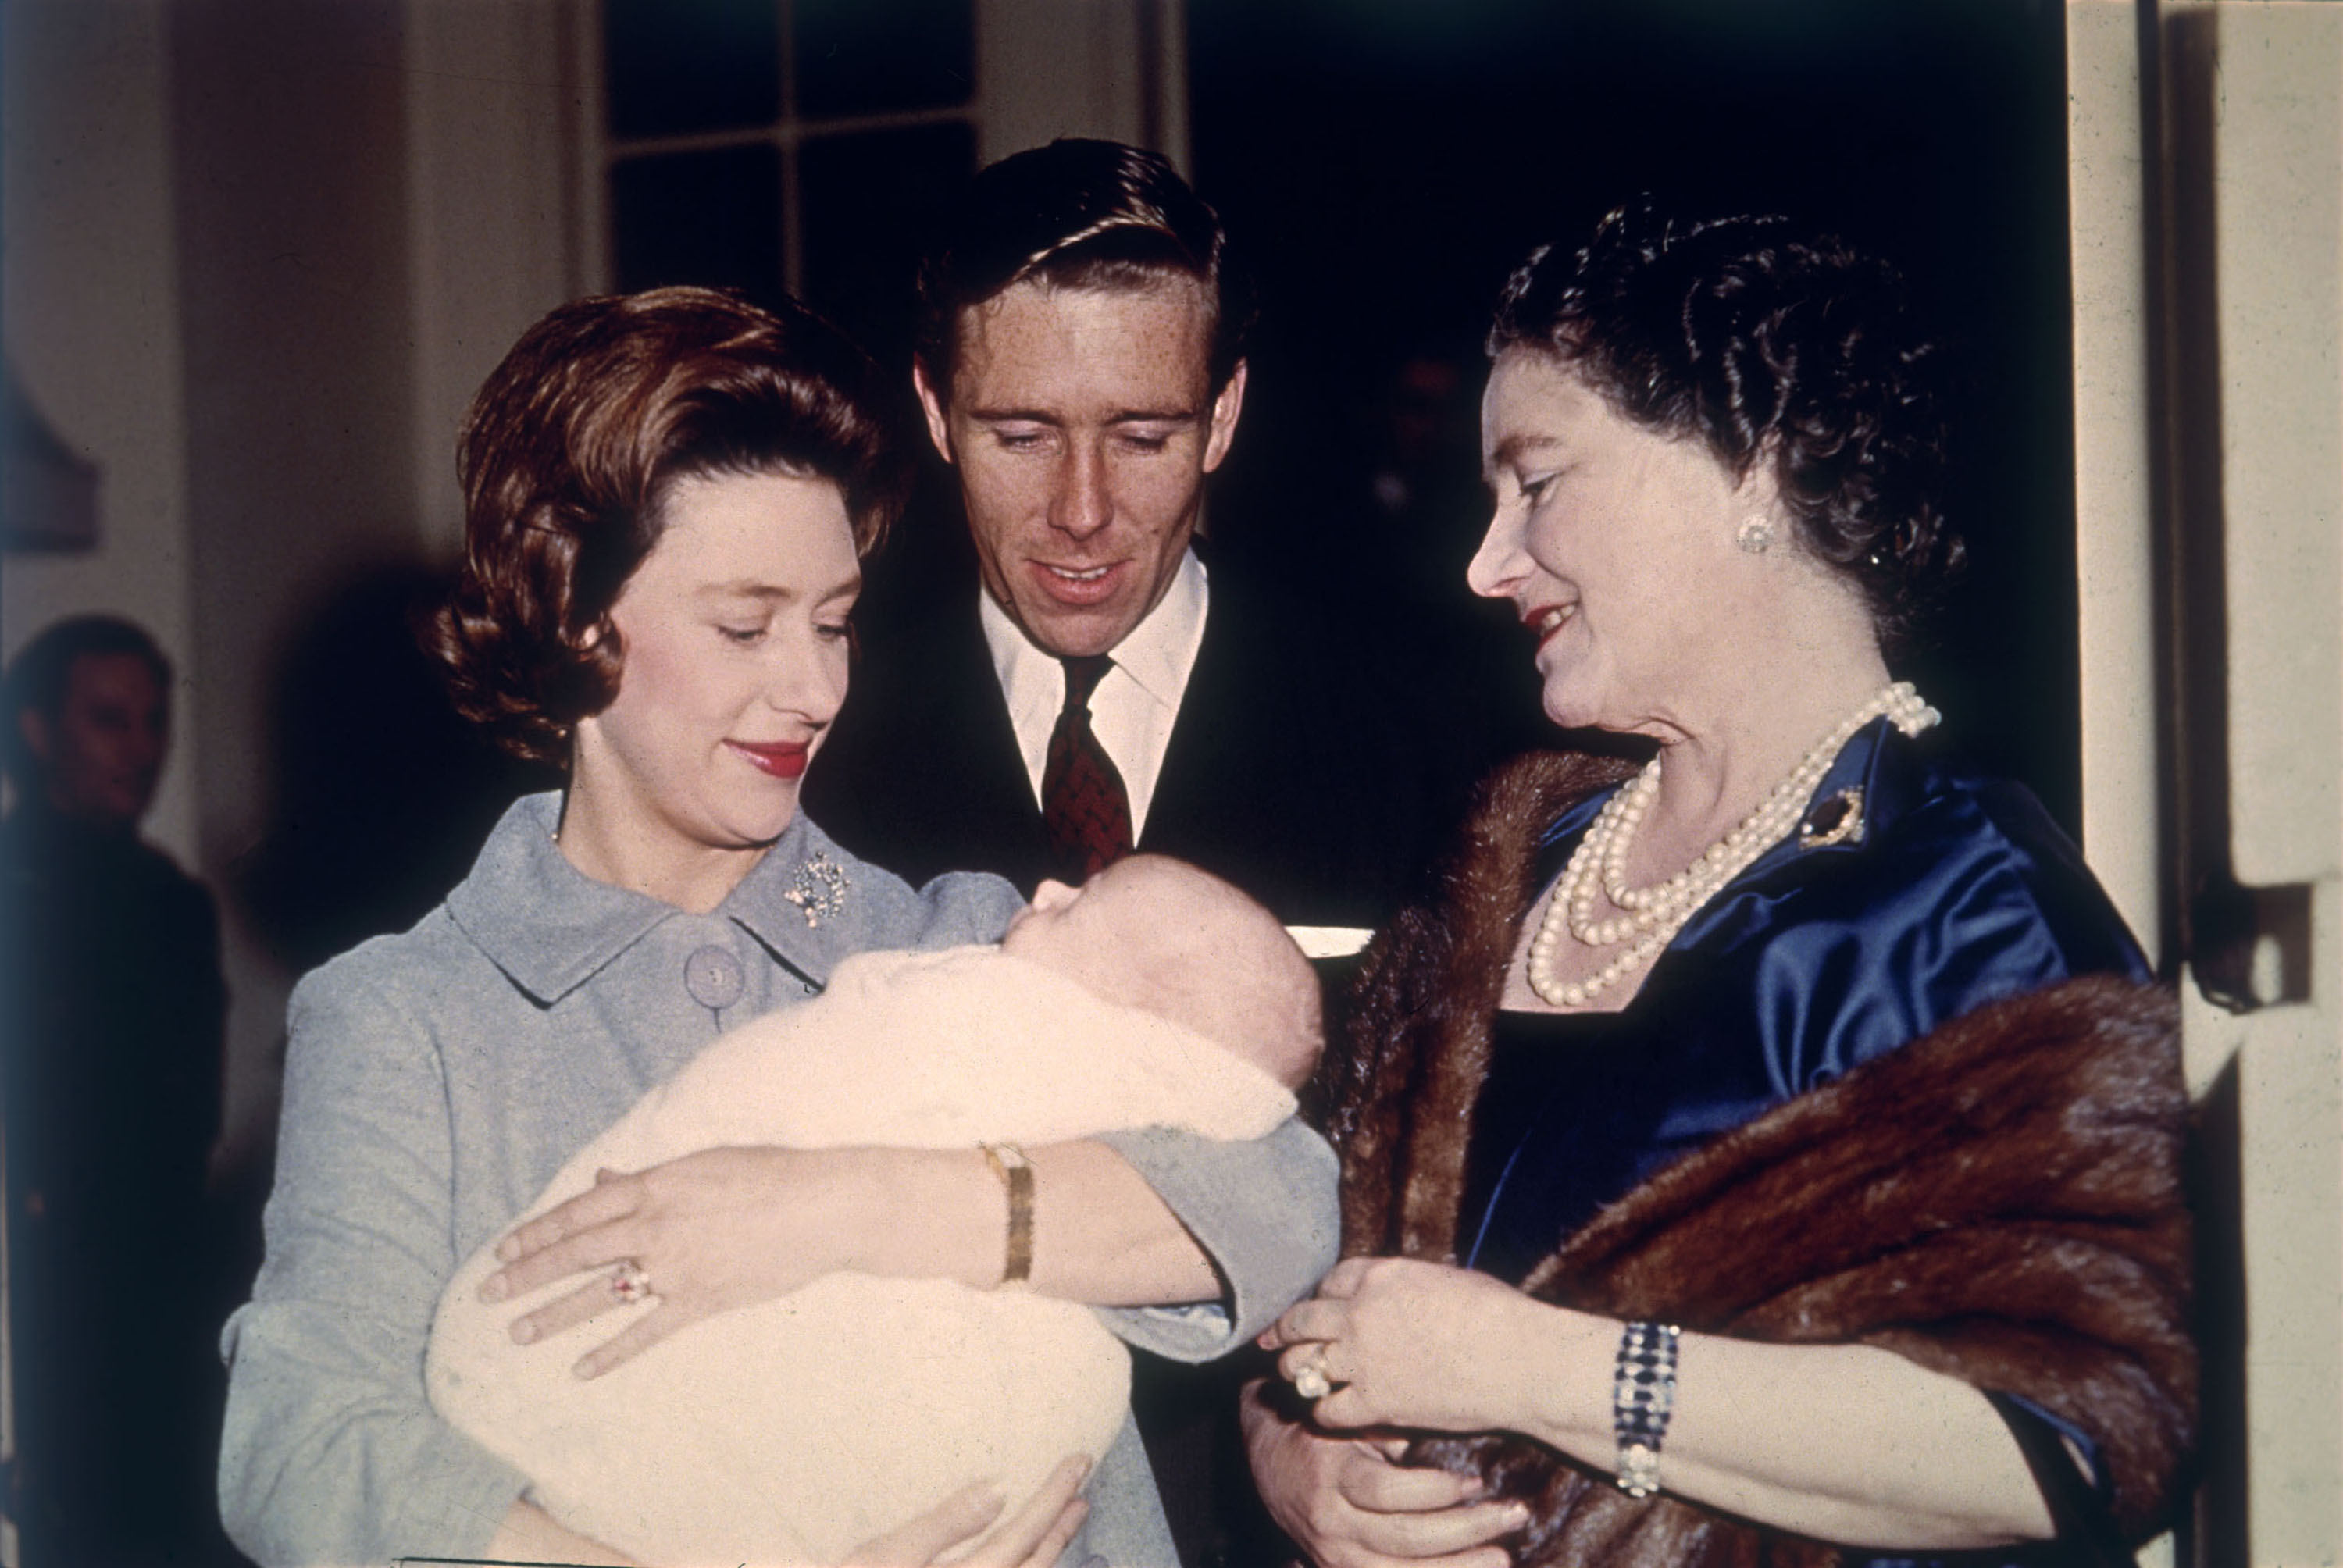 The Queen Mother with baby David Linley and his parents Princess Margaret and Lord Snowdon